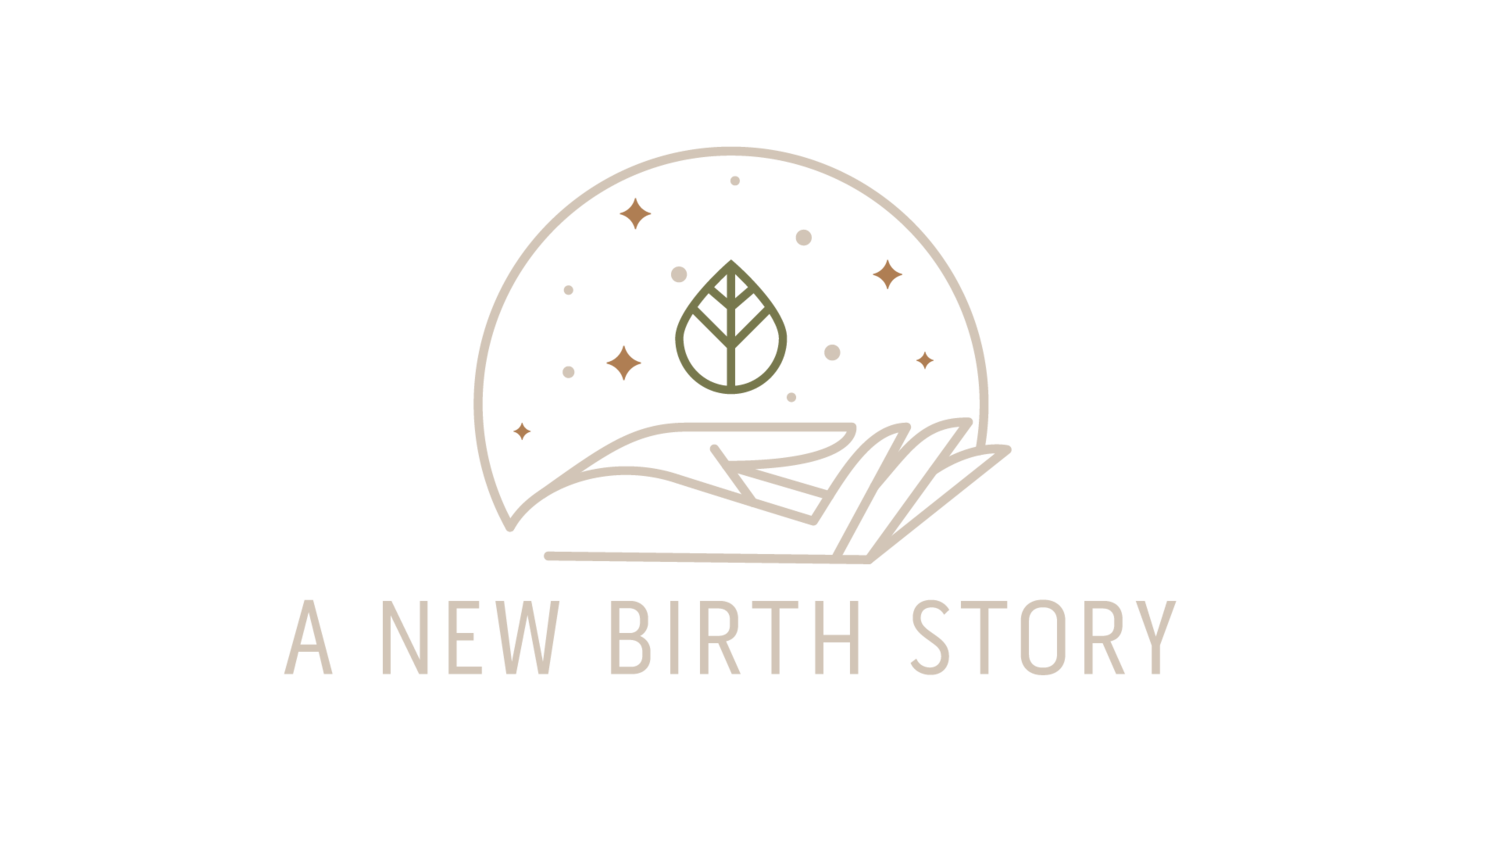 A New Birth Story